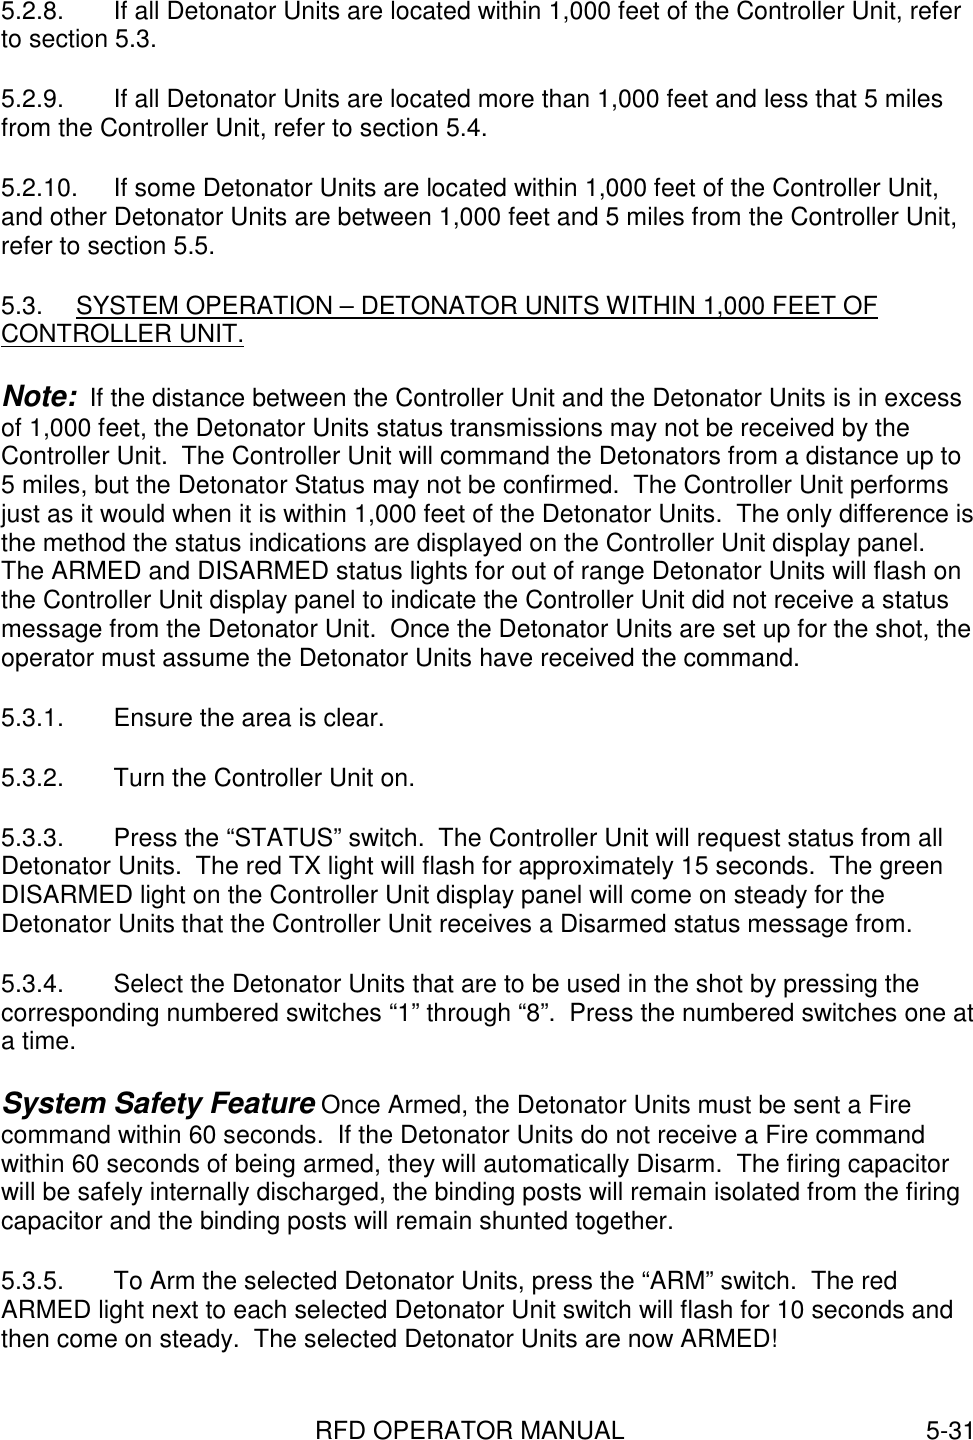 RFD OPERATOR MANUAL 5-315.2.8.  If all Detonator Units are located within 1,000 feet of the Controller Unit, referto section 5.3.5.2.9.  If all Detonator Units are located more than 1,000 feet and less that 5 milesfrom the Controller Unit, refer to section 5.4.5.2.10.  If some Detonator Units are located within 1,000 feet of the Controller Unit,and other Detonator Units are between 1,000 feet and 5 miles from the Controller Unit,refer to section 5.5.5.3.  SYSTEM OPERATION – DETONATOR UNITS WITHIN 1,000 FEET OFCONTROLLER UNIT.Note:  If the distance between the Controller Unit and the Detonator Units is in excessof 1,000 feet, the Detonator Units status transmissions may not be received by theController Unit.  The Controller Unit will command the Detonators from a distance up to5 miles, but the Detonator Status may not be confirmed.  The Controller Unit performsjust as it would when it is within 1,000 feet of the Detonator Units.  The only difference isthe method the status indications are displayed on the Controller Unit display panel.The ARMED and DISARMED status lights for out of range Detonator Units will flash onthe Controller Unit display panel to indicate the Controller Unit did not receive a statusmessage from the Detonator Unit.  Once the Detonator Units are set up for the shot, theoperator must assume the Detonator Units have received the command.5.3.1.  Ensure the area is clear.5.3.2.  Turn the Controller Unit on.5.3.3.  Press the “STATUS” switch.  The Controller Unit will request status from allDetonator Units.  The red TX light will flash for approximately 15 seconds.  The greenDISARMED light on the Controller Unit display panel will come on steady for theDetonator Units that the Controller Unit receives a Disarmed status message from.5.3.4.  Select the Detonator Units that are to be used in the shot by pressing thecorresponding numbered switches “1” through “8”.  Press the numbered switches one ata time.System Safety Feature Once Armed, the Detonator Units must be sent a Firecommand within 60 seconds.  If the Detonator Units do not receive a Fire commandwithin 60 seconds of being armed, they will automatically Disarm.  The firing capacitorwill be safely internally discharged, the binding posts will remain isolated from the firingcapacitor and the binding posts will remain shunted together.5.3.5.  To Arm the selected Detonator Units, press the “ARM” switch.  The redARMED light next to each selected Detonator Unit switch will flash for 10 seconds andthen come on steady.  The selected Detonator Units are now ARMED!